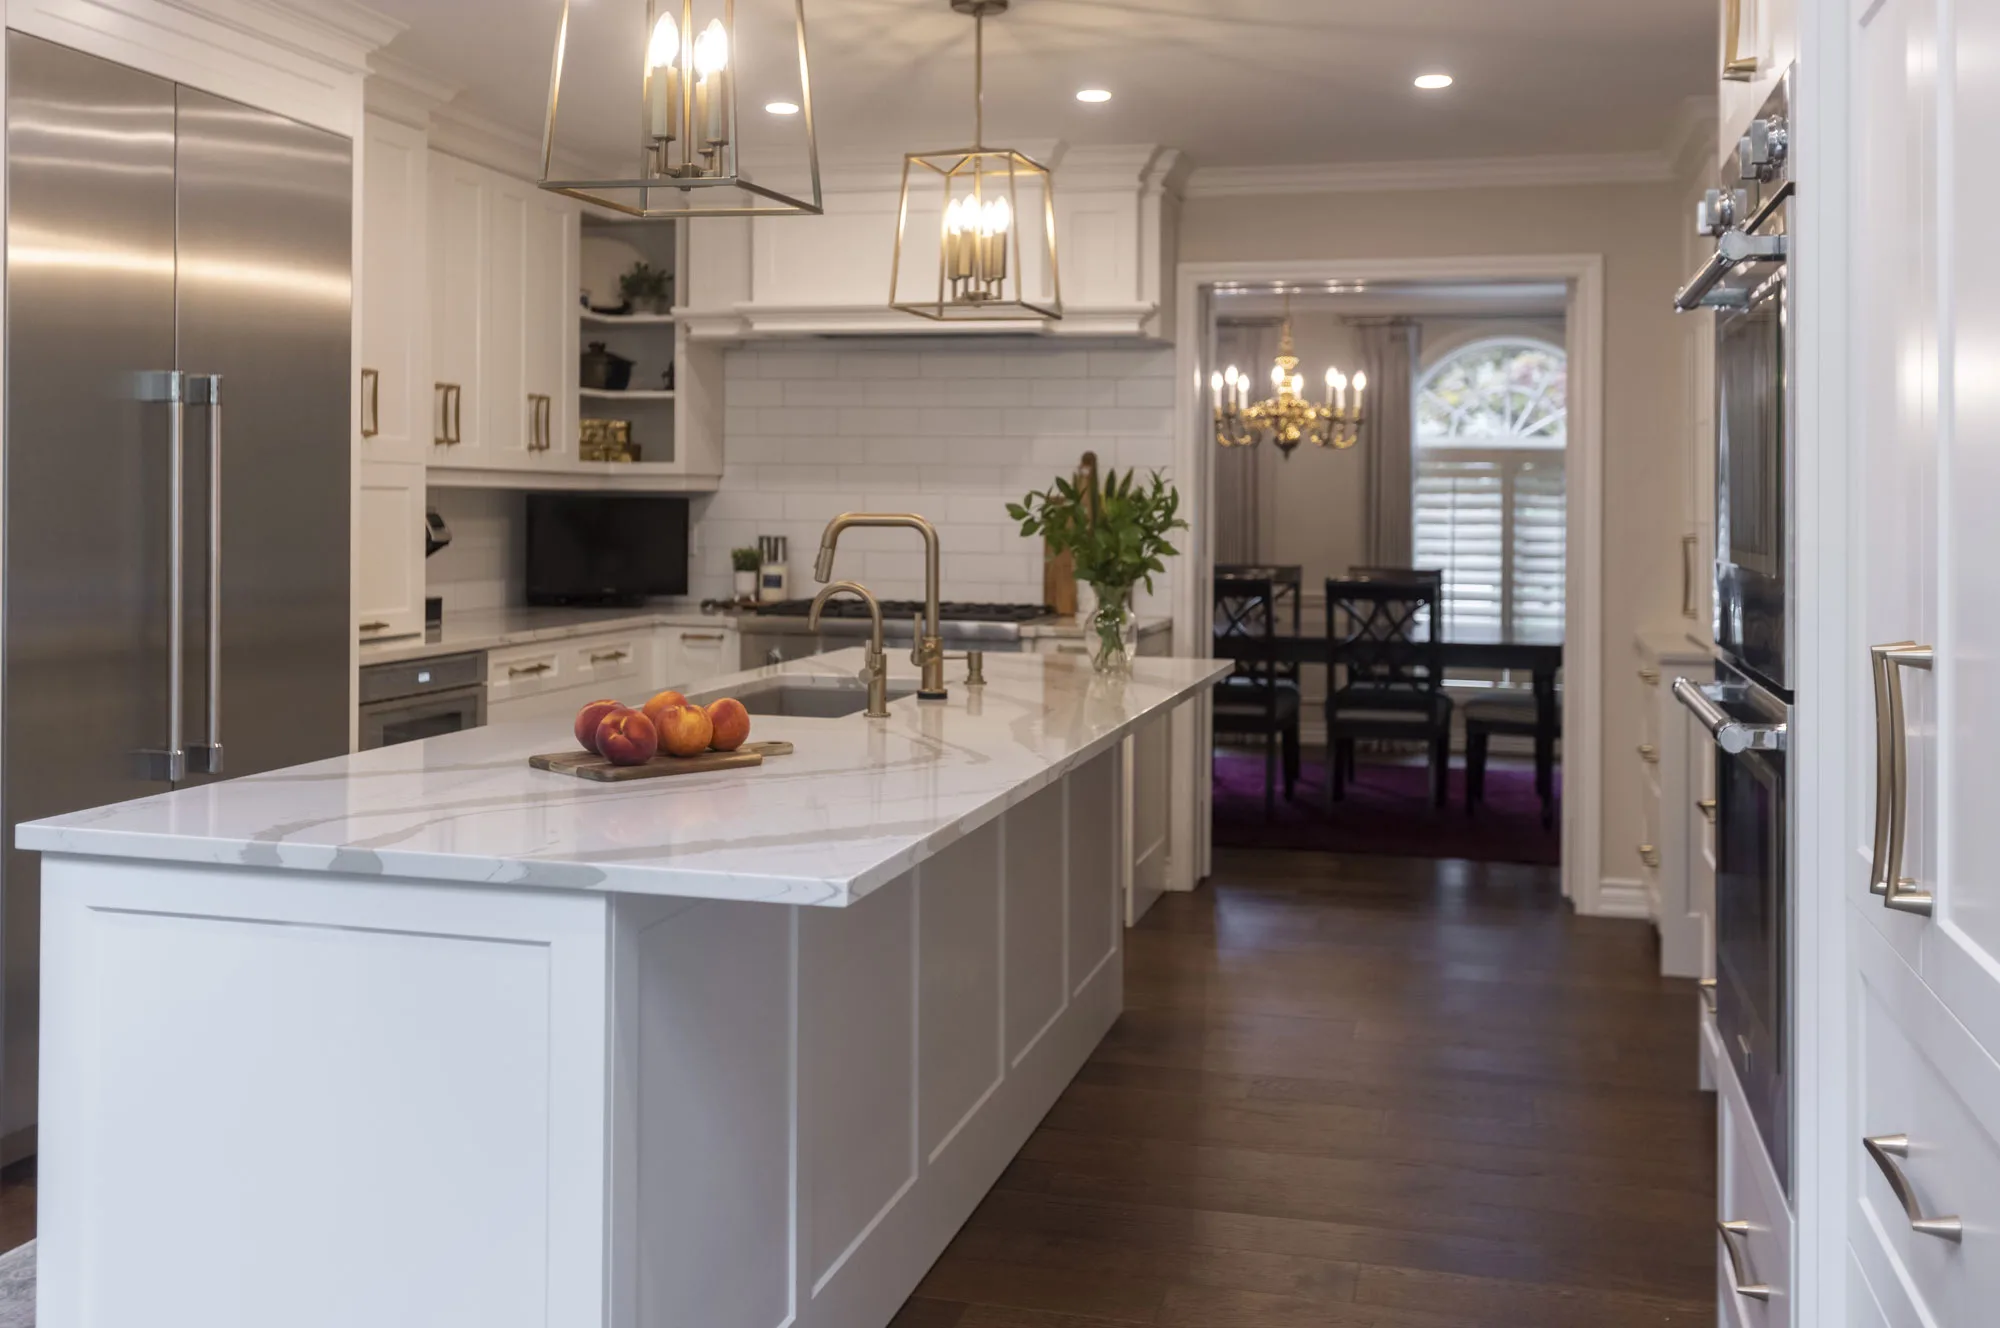 A large kitchen with white upper and lower cupboards with large silver handles and large white island.